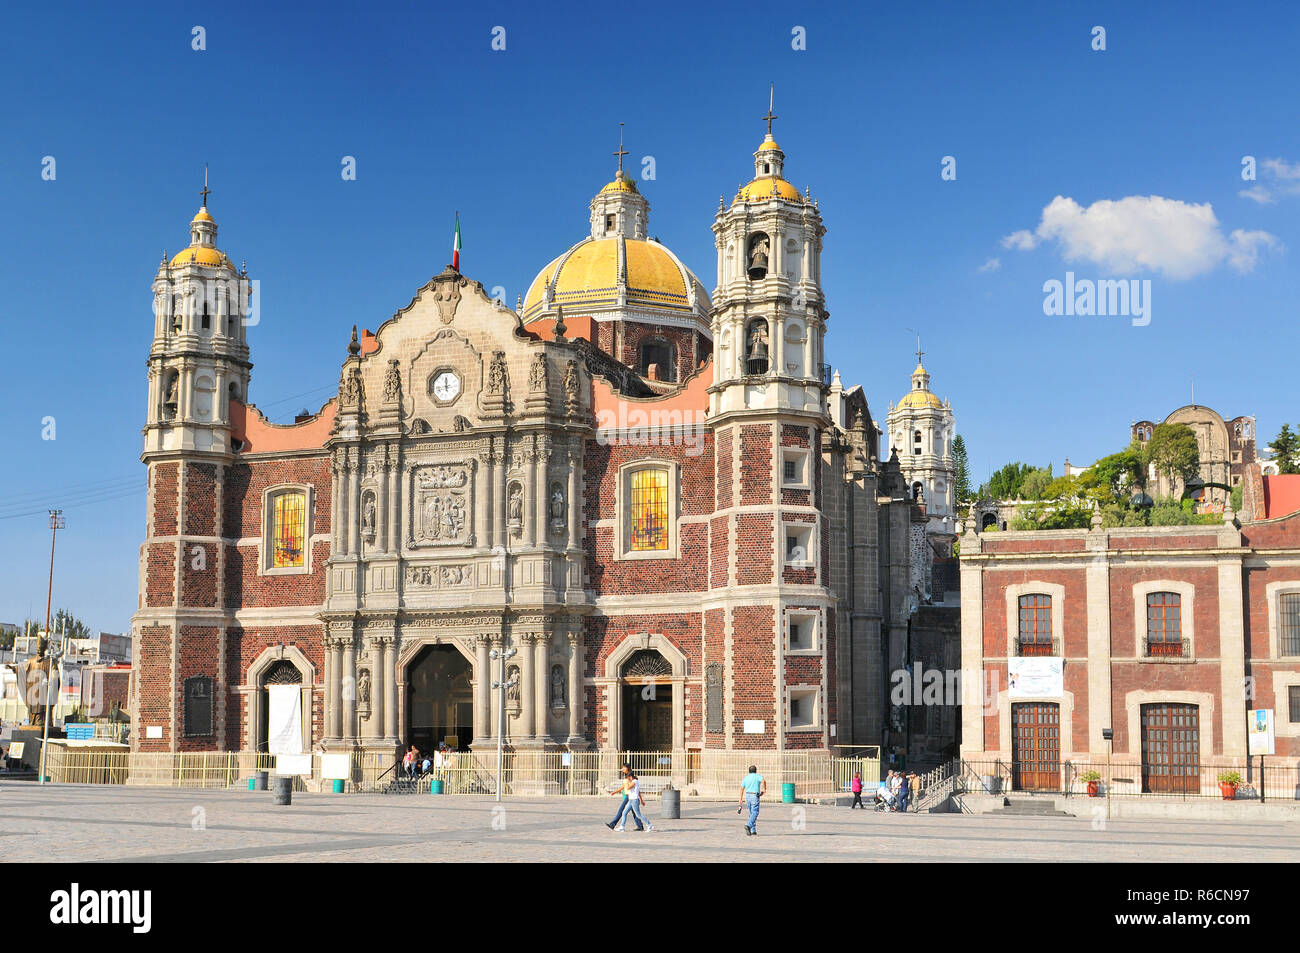 The Basilica Of Our Lady Of Guadalupe, Roman Catholic Church In Mexico City, Mexico Stock Photo